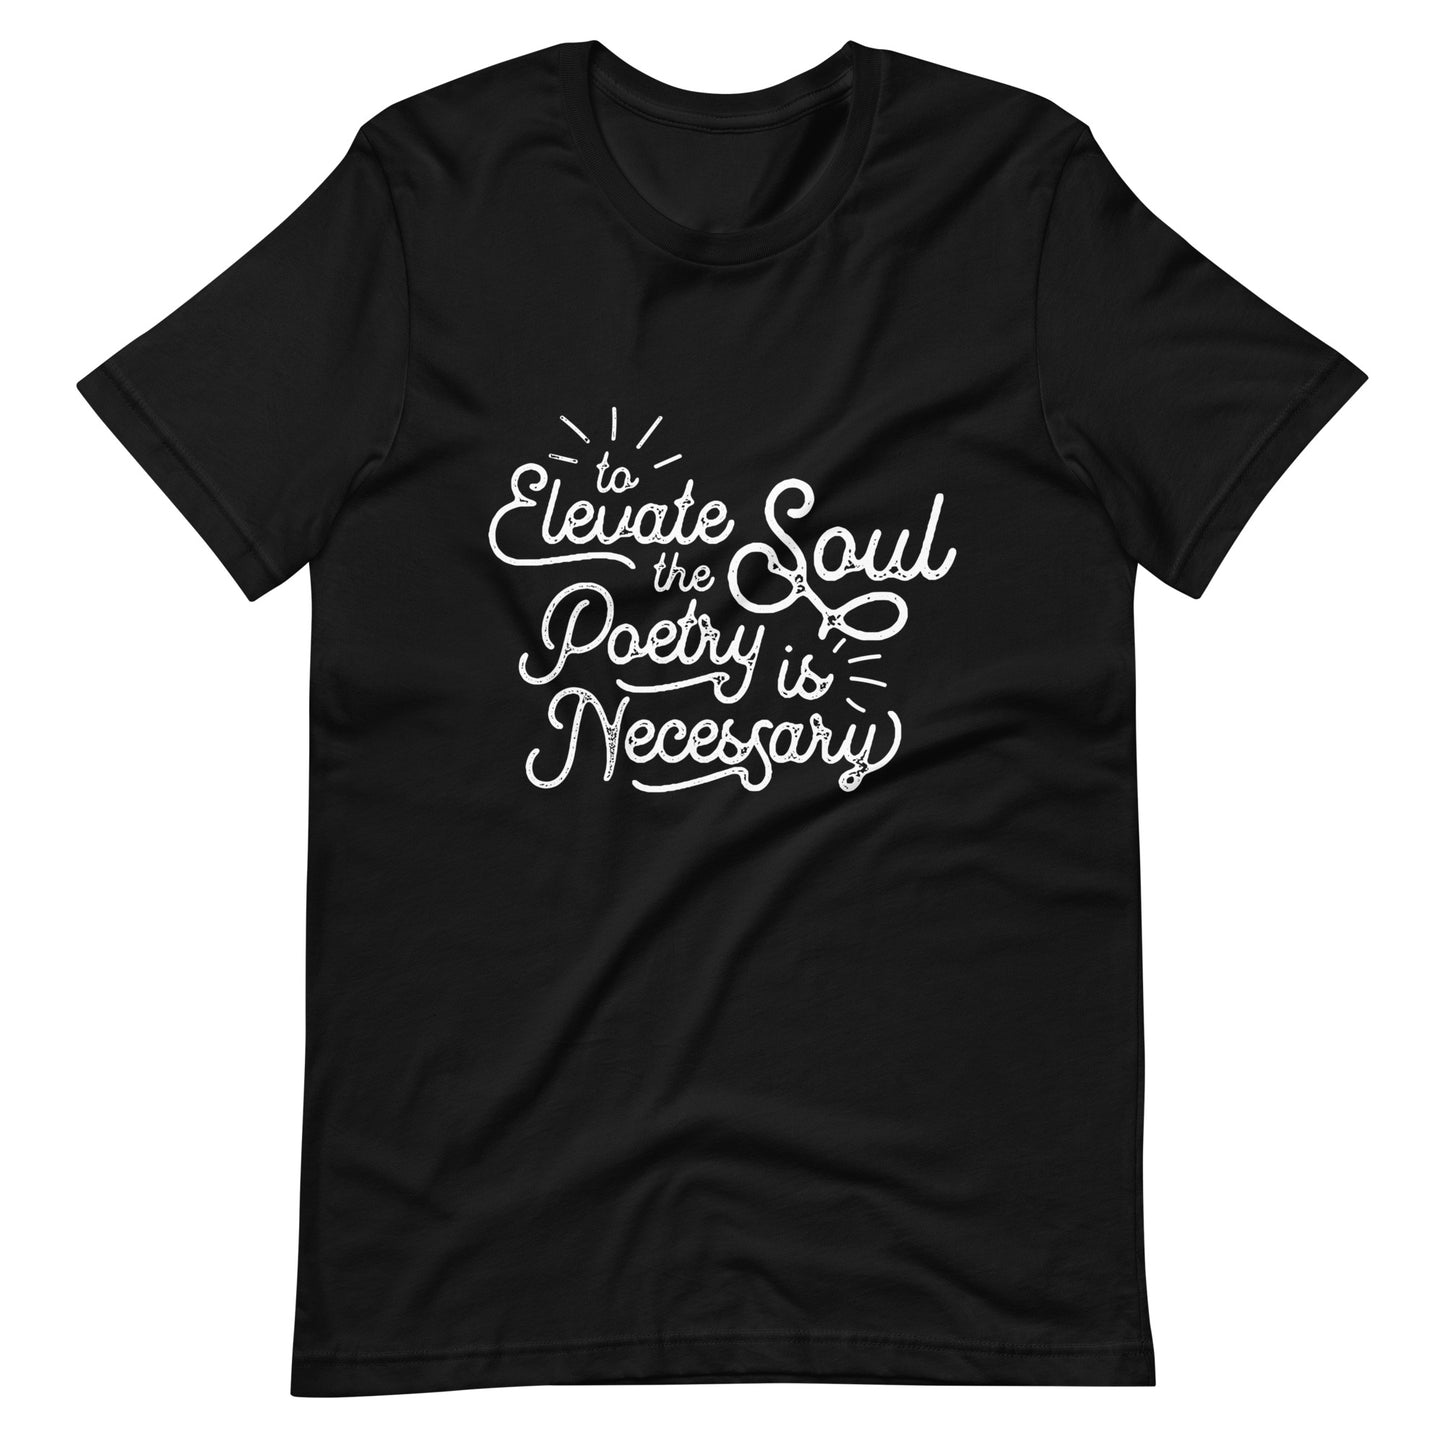 To Elevate the Soul Edgar Allan Poe Quote - Men's t-shirt - Black Front